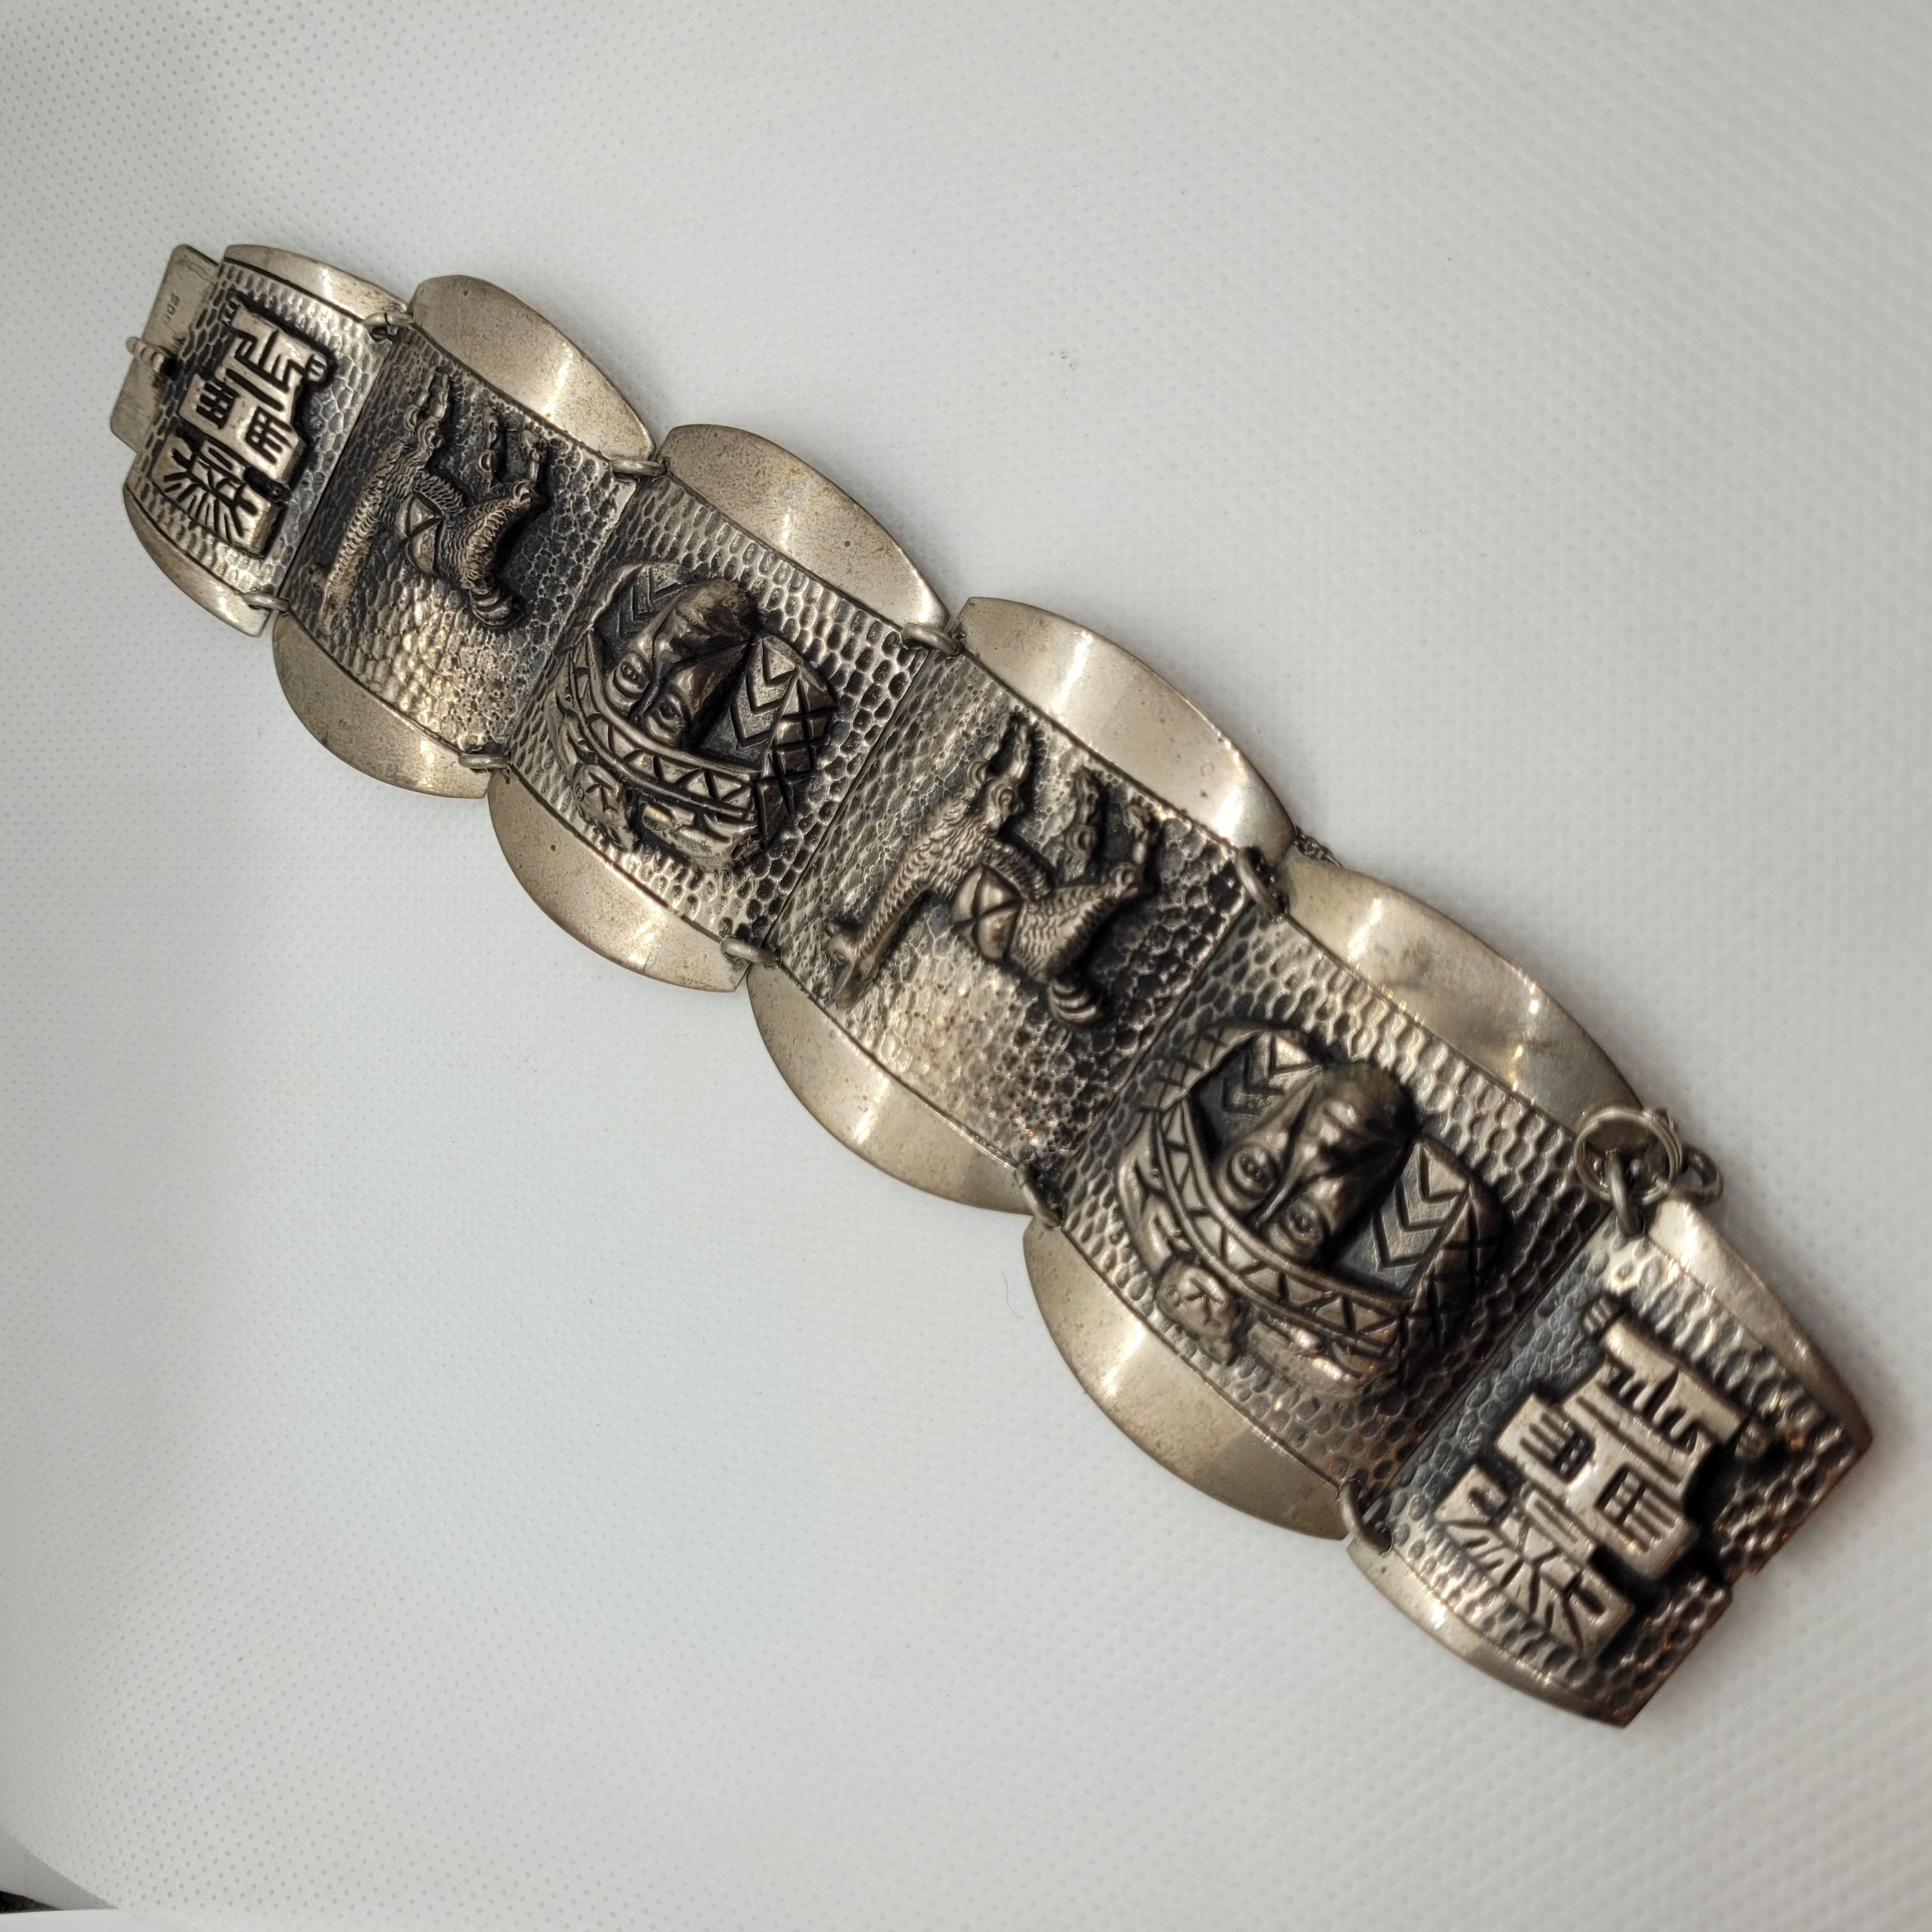 Vintage Aztec Mayan Design Silver Bracelet, 70 Grams, Safety Chain In Good Condition For Sale In Rancho Santa Fe, CA